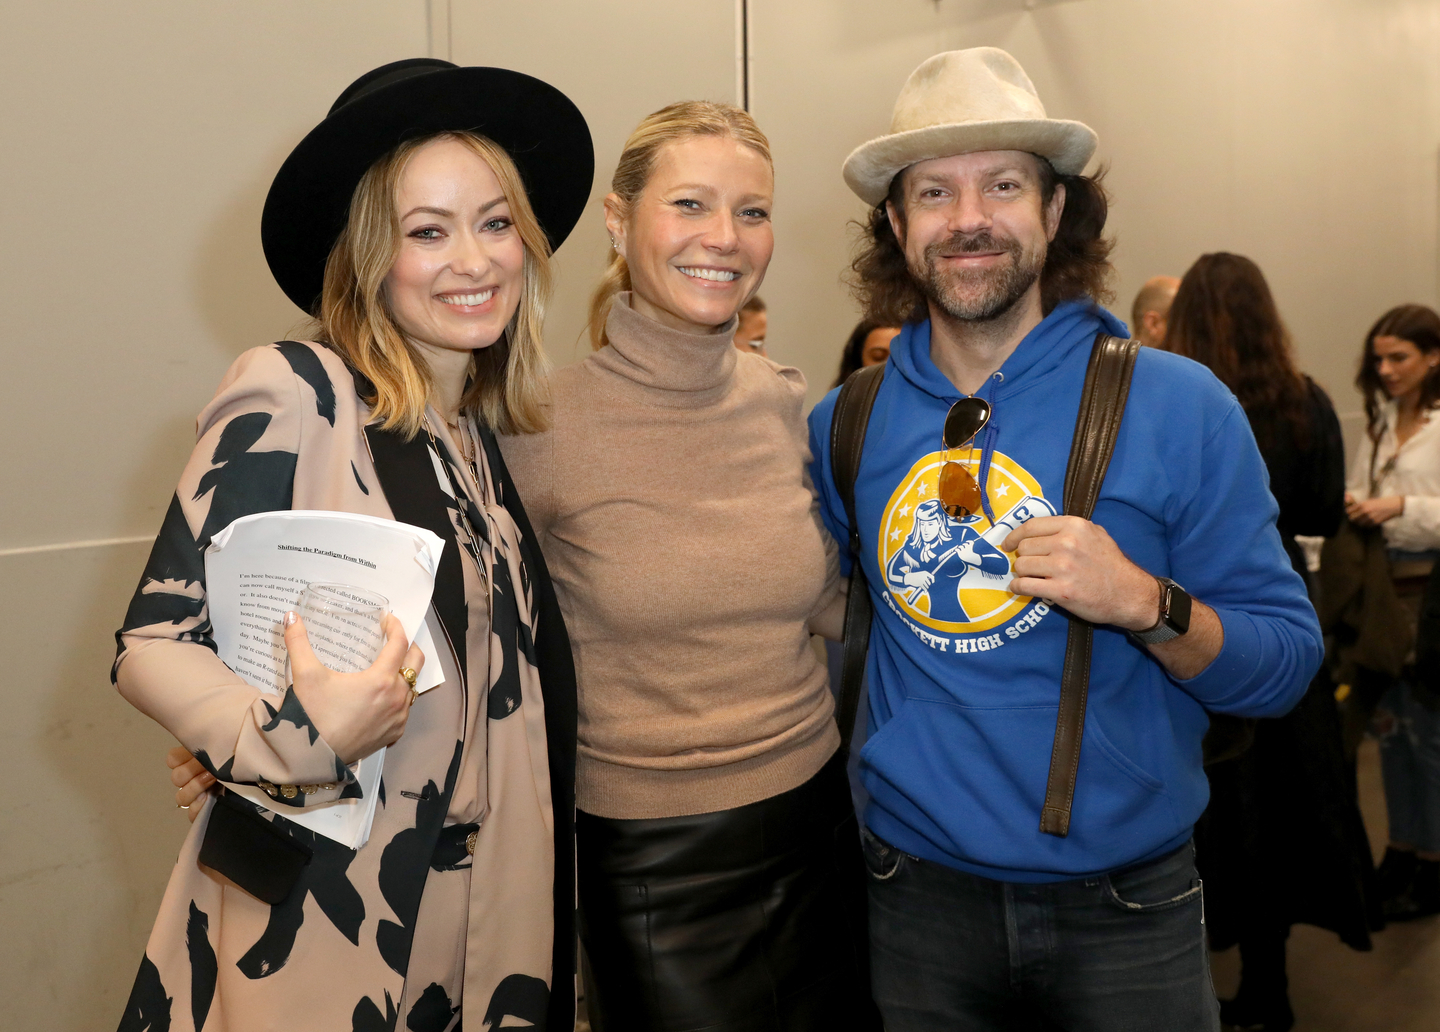 (L-R) Olivia Wilde, Gwyneth Paltrow and Jason Sudeikis pose backstage. Photo by Diego Donamaria/Getty Images for SXSW